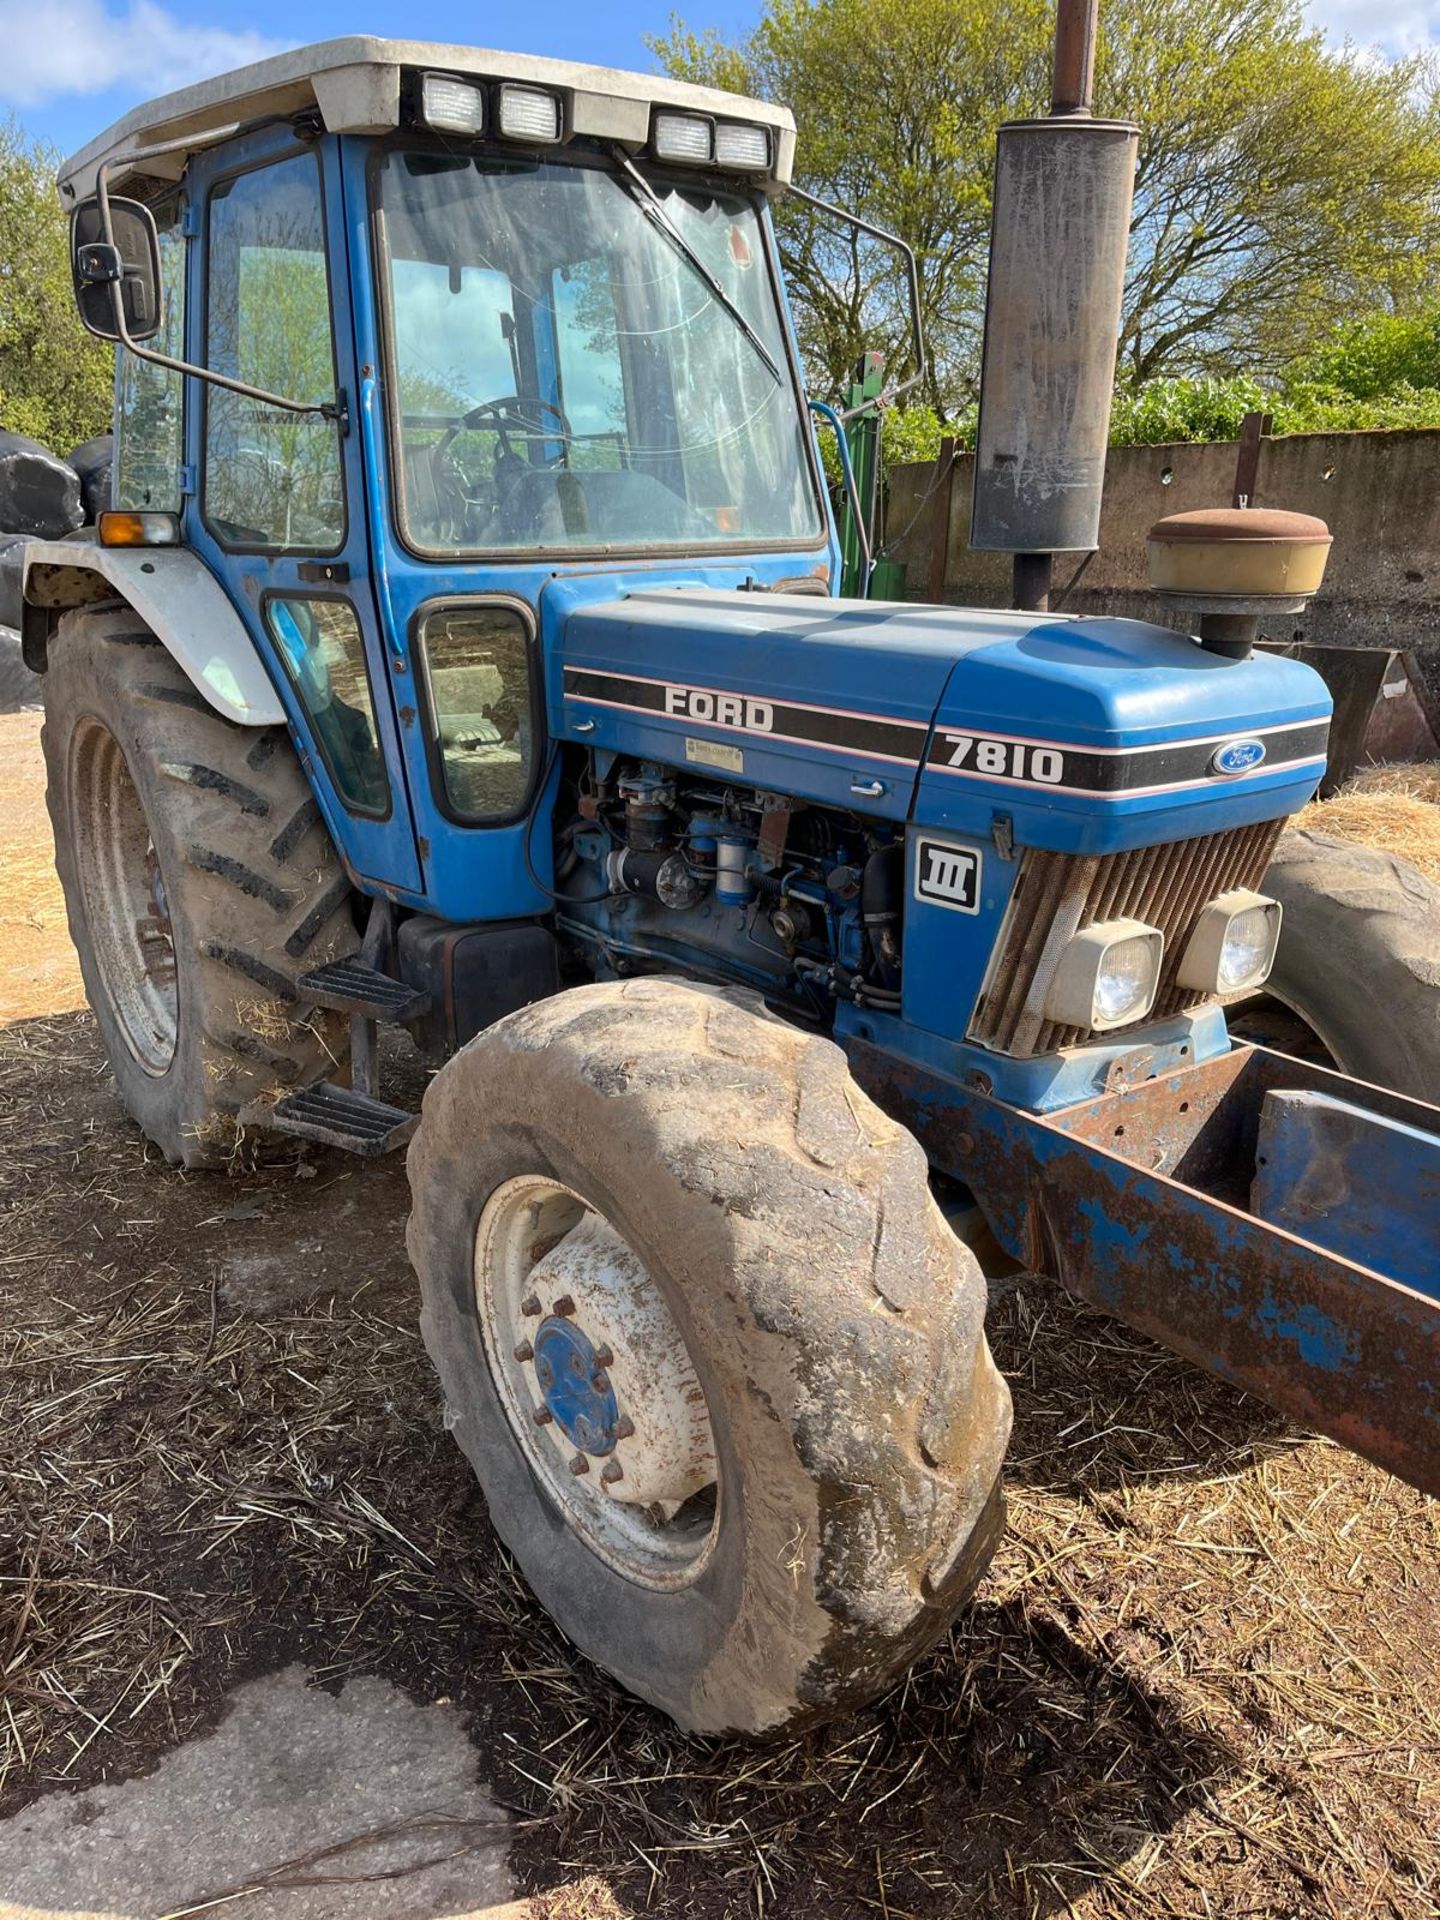 Ford 7810 tractor 4x4 120ph 7500hrs - Image 2 of 5